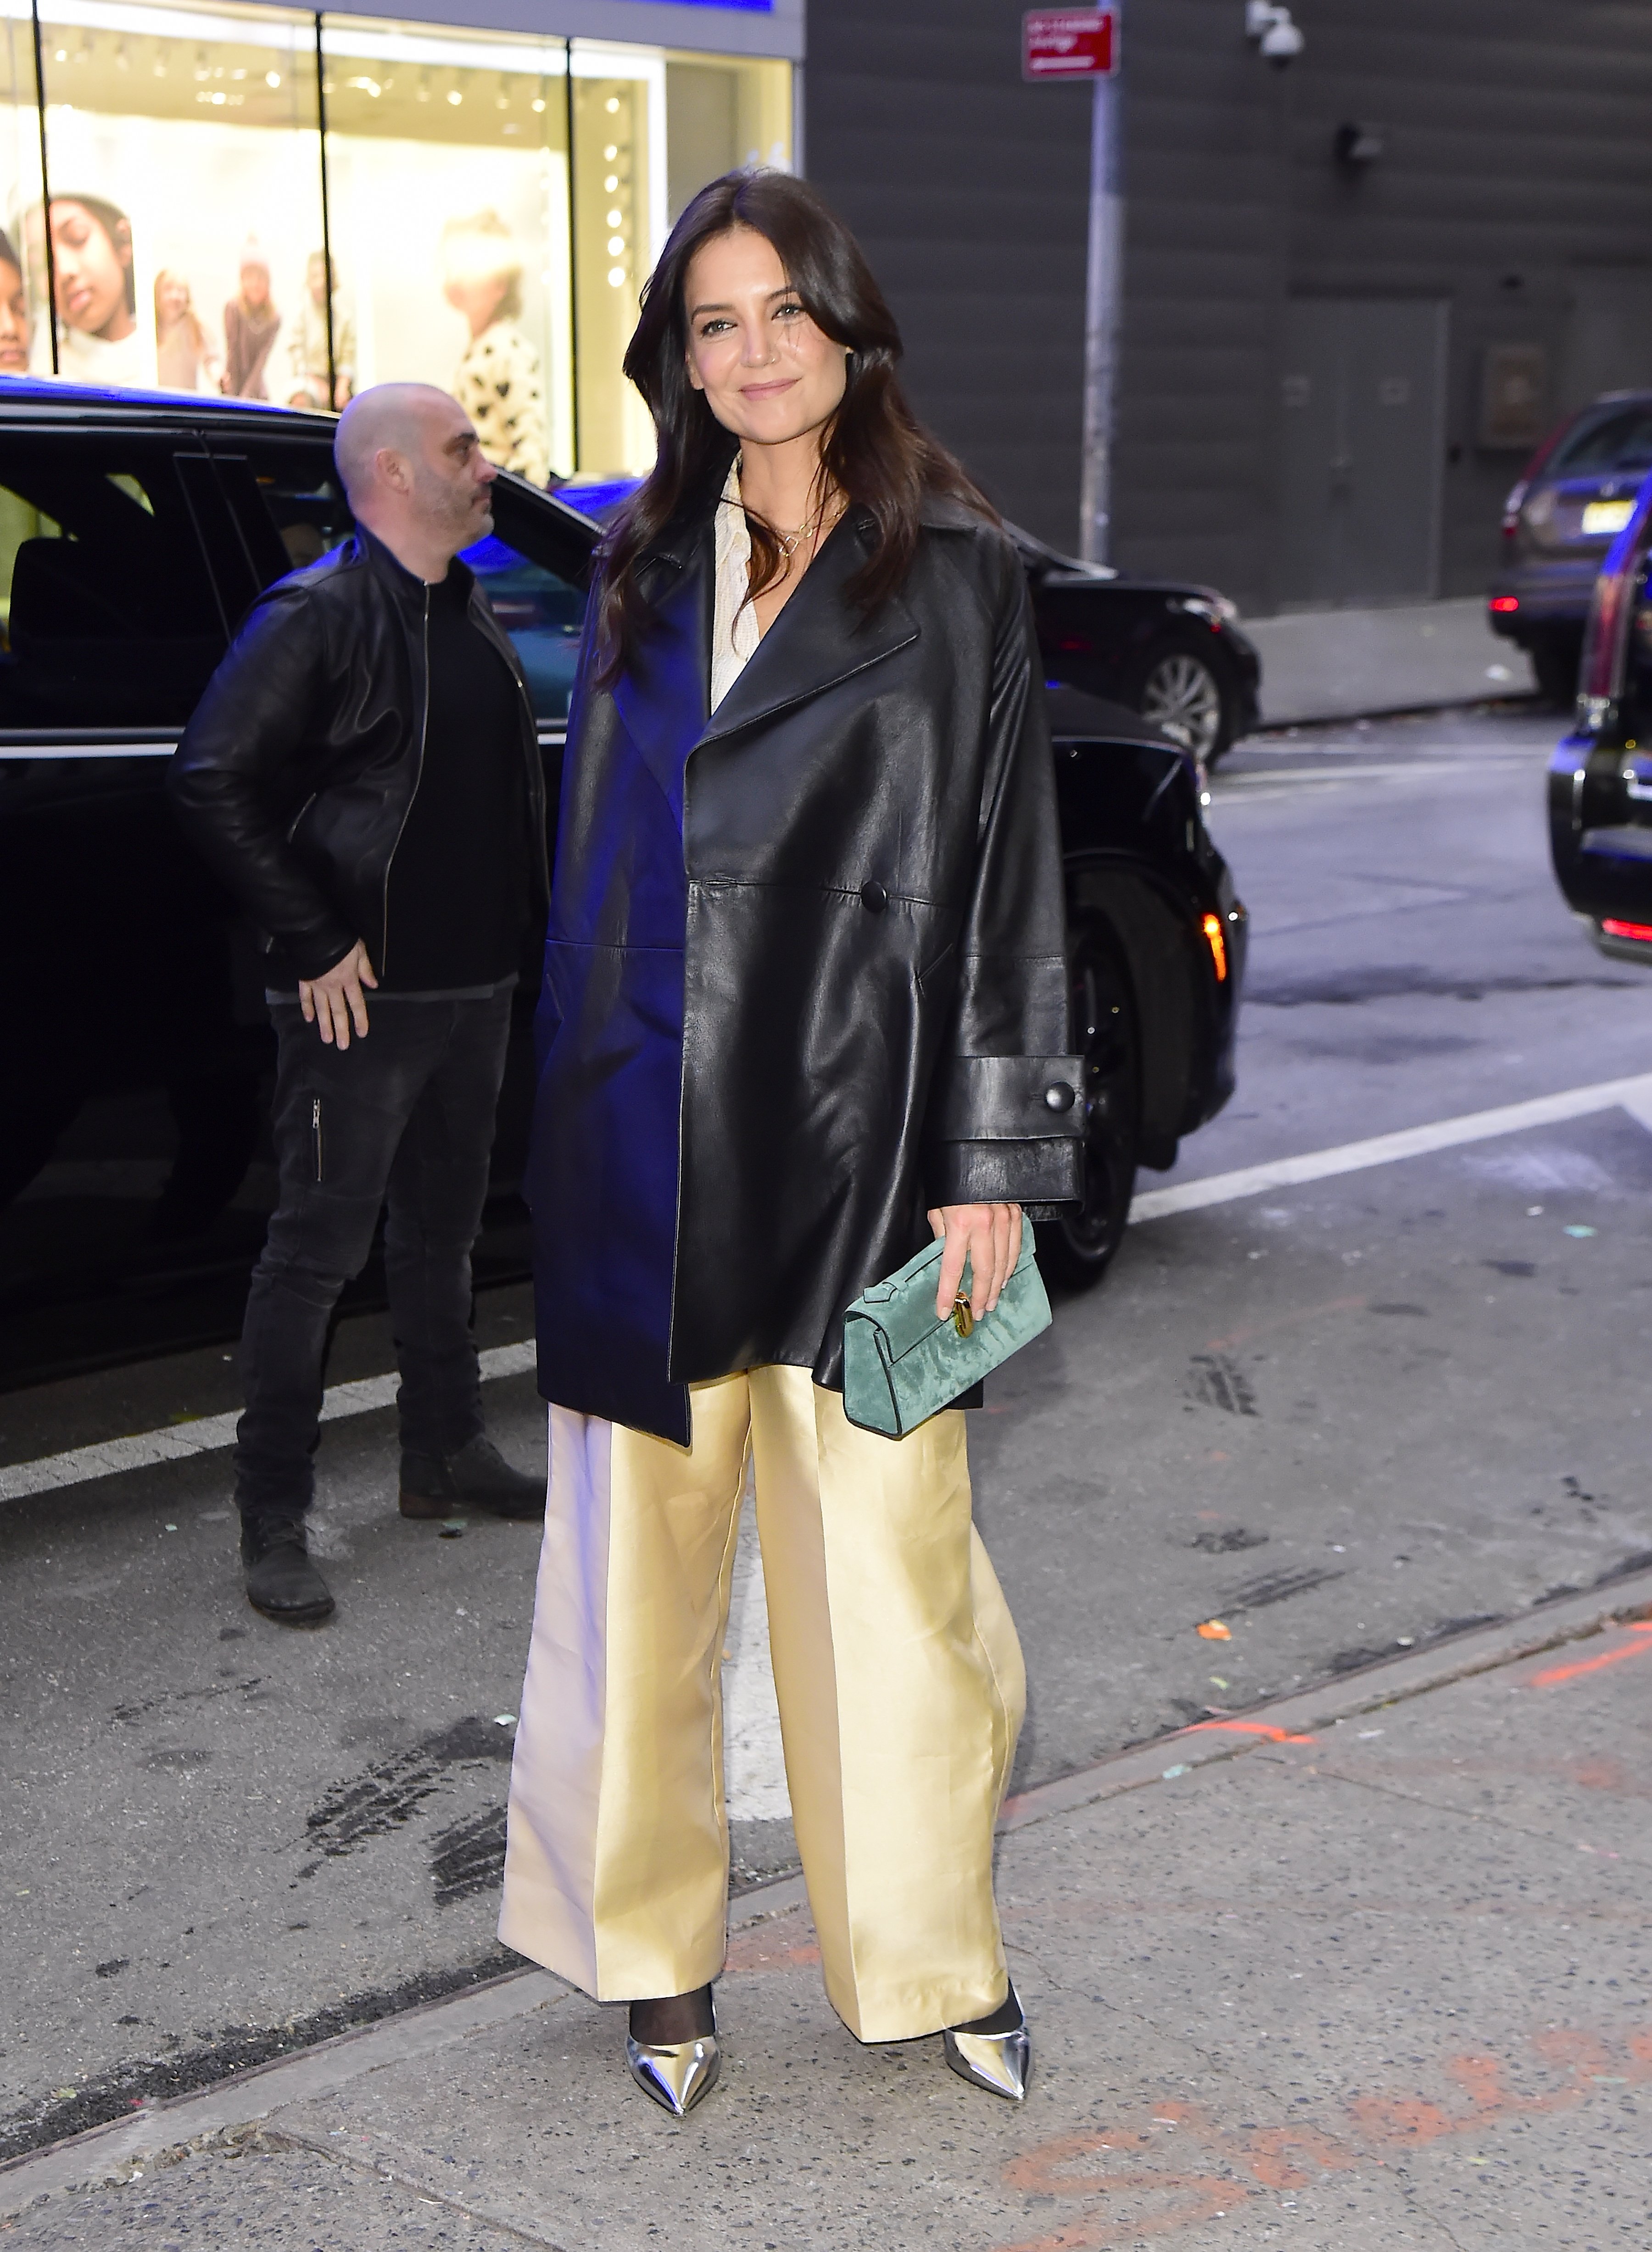 Katie Holmes vor "Good Morning America" am 11. Januar 2023 in New York City | Quelle: Getty Images